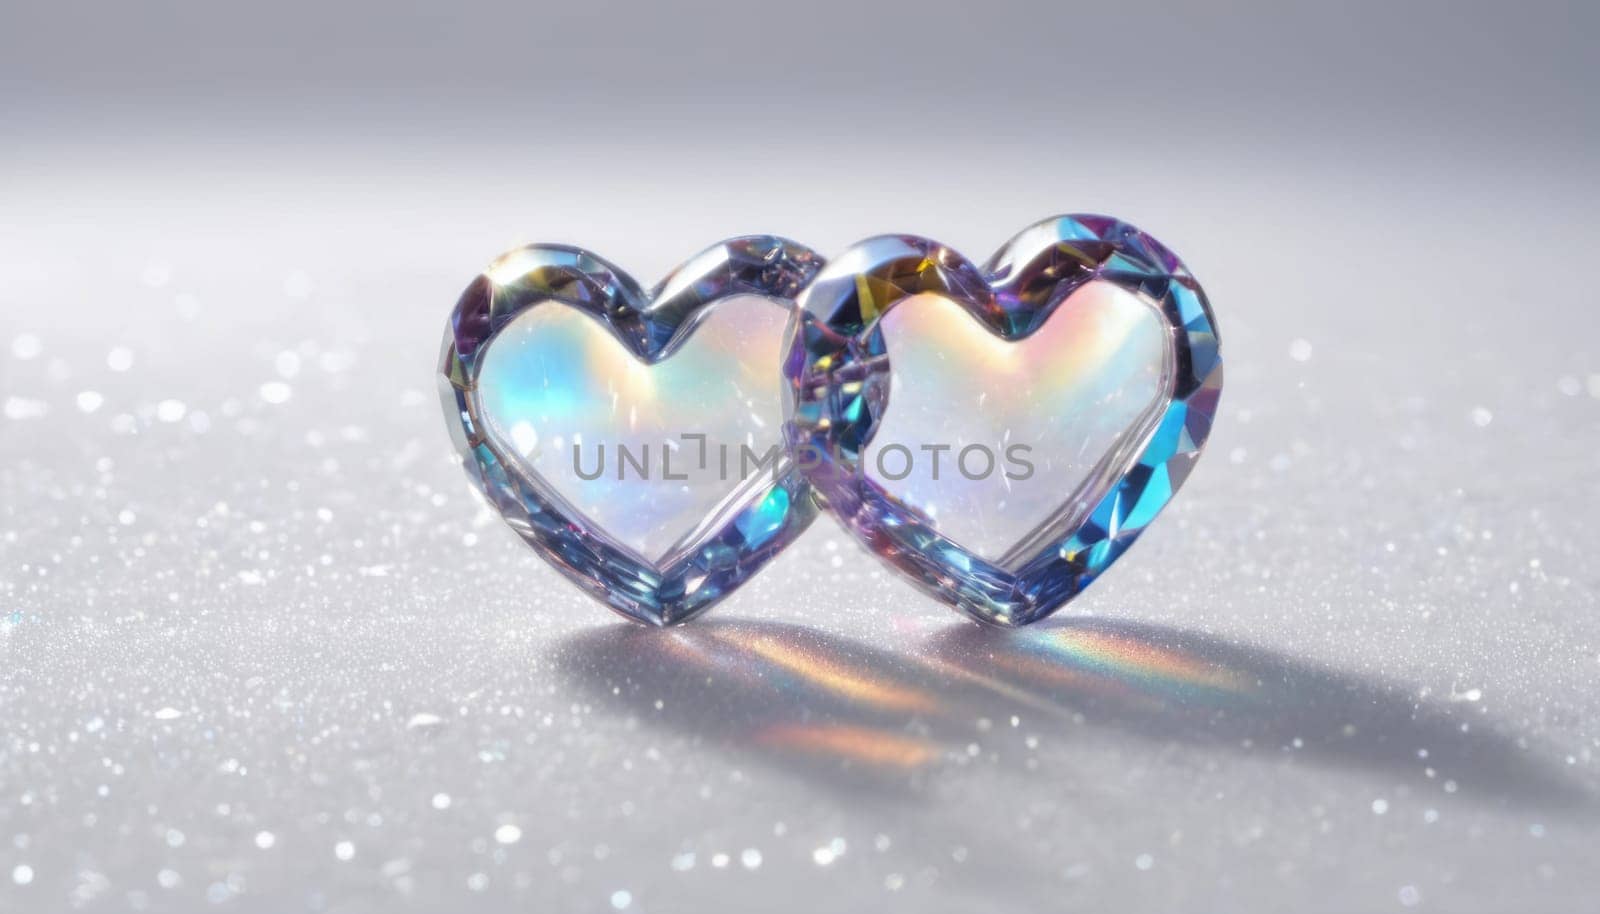 crystal's, translucent, transparent, close-up with a deep depth of field, Two hearts on abstract white background with falling crystals in the shape of a heart, realistic detailed, transparent colors of the rainbow hearts, transparent scattering crystals,lens flare, glints